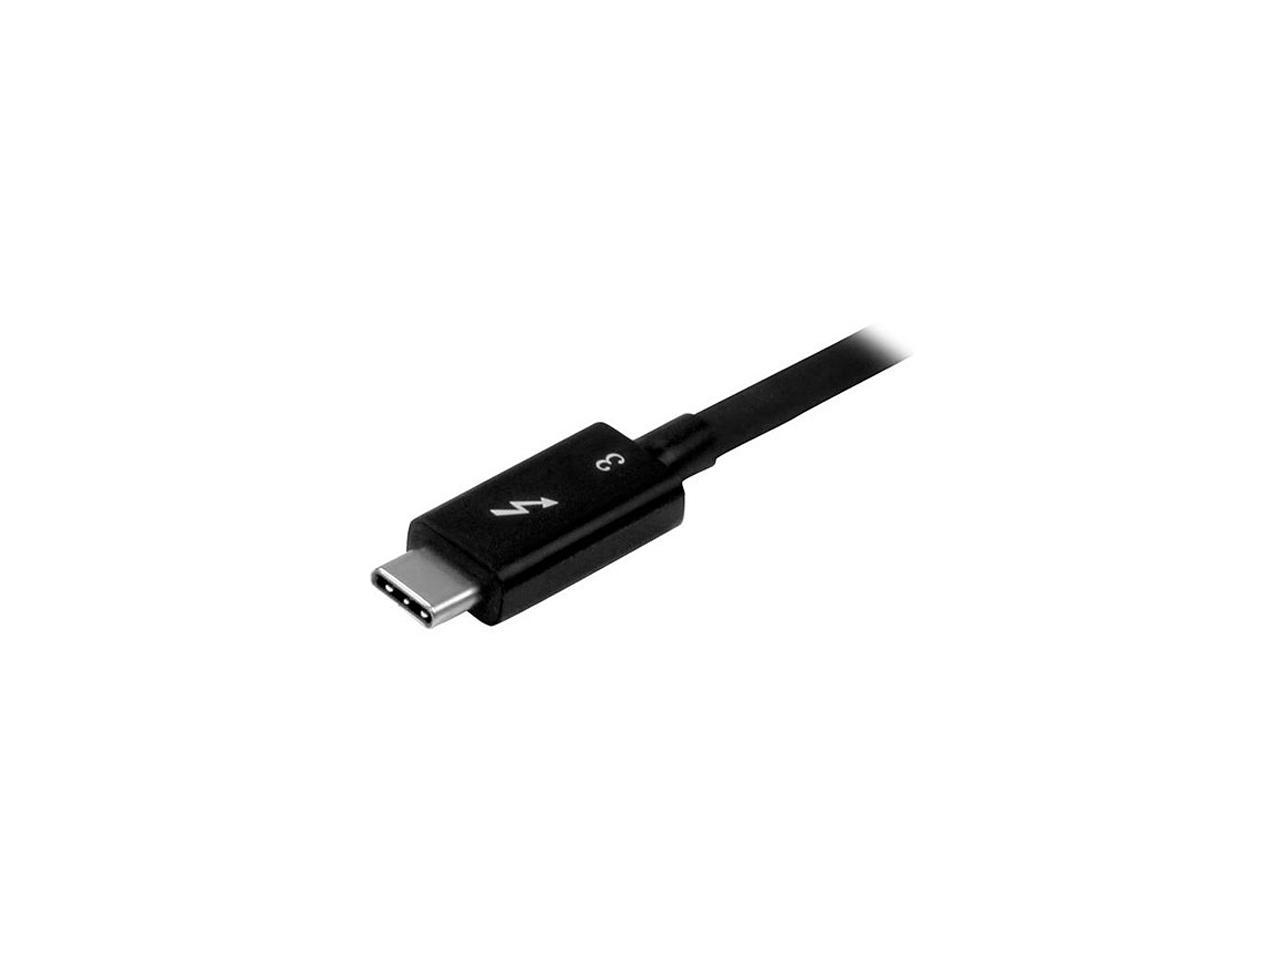 thunderbolt 3 to hdmi connector